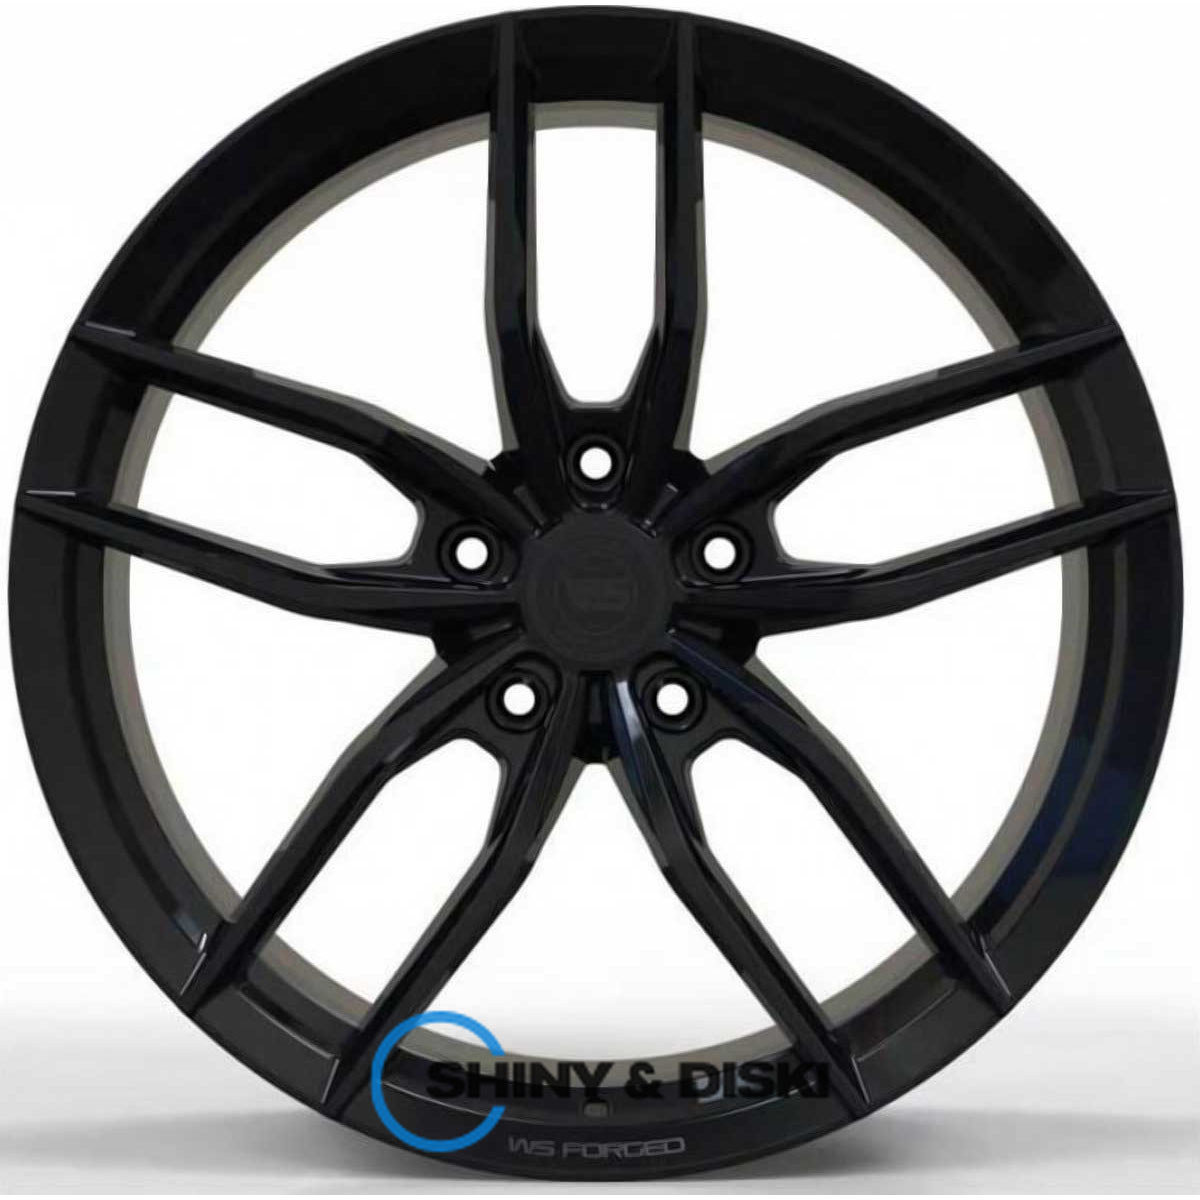 ws forged ws1049 gloss black